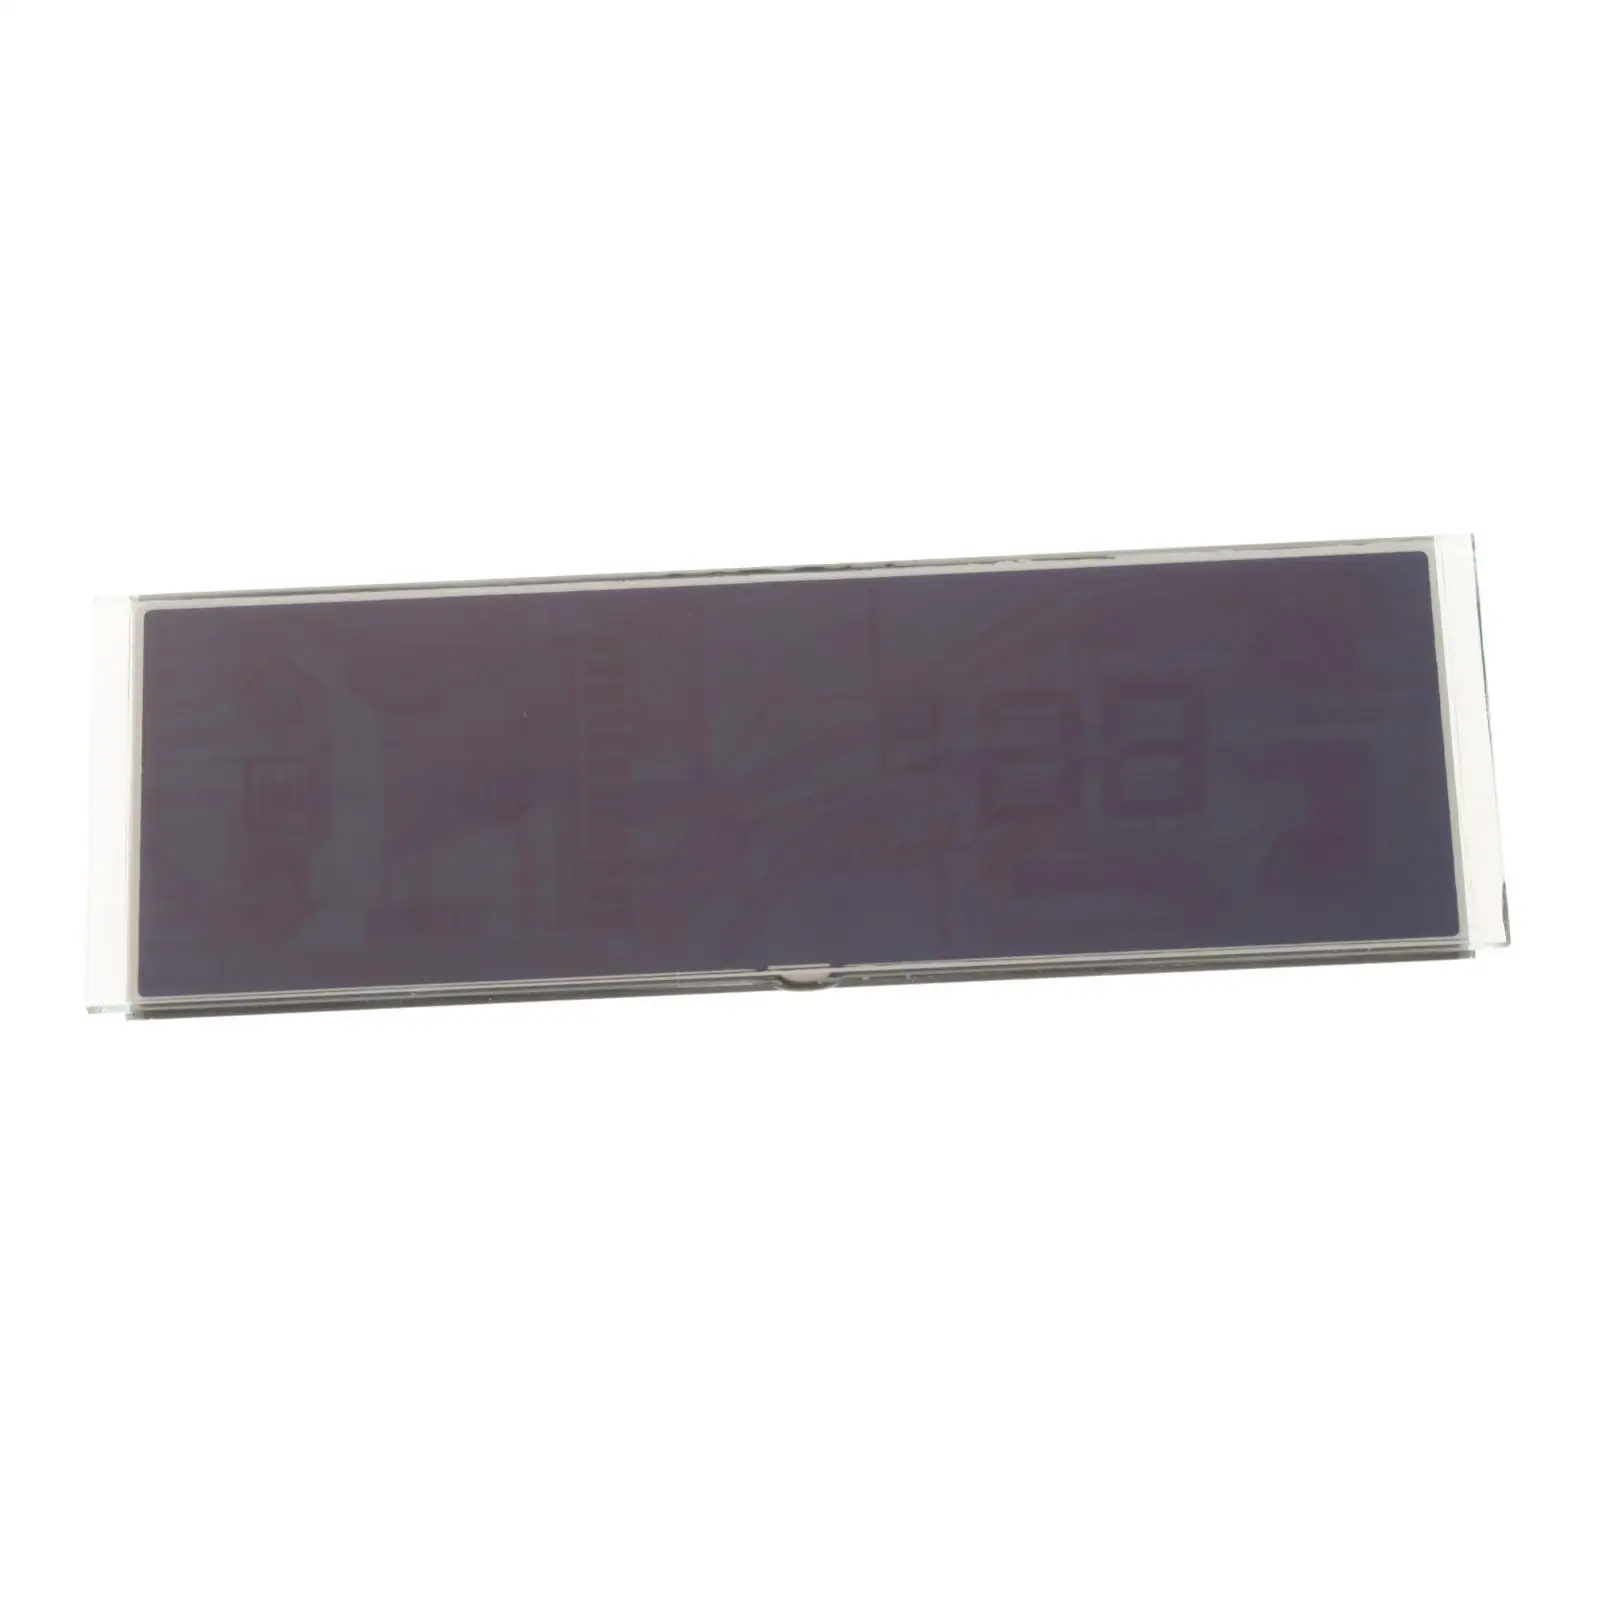 LCD Screen Repl ement Display Fits for 911 9997-2006 ,Ruf 2002 ,  Heater Temperature Unit Ruf 3400 S